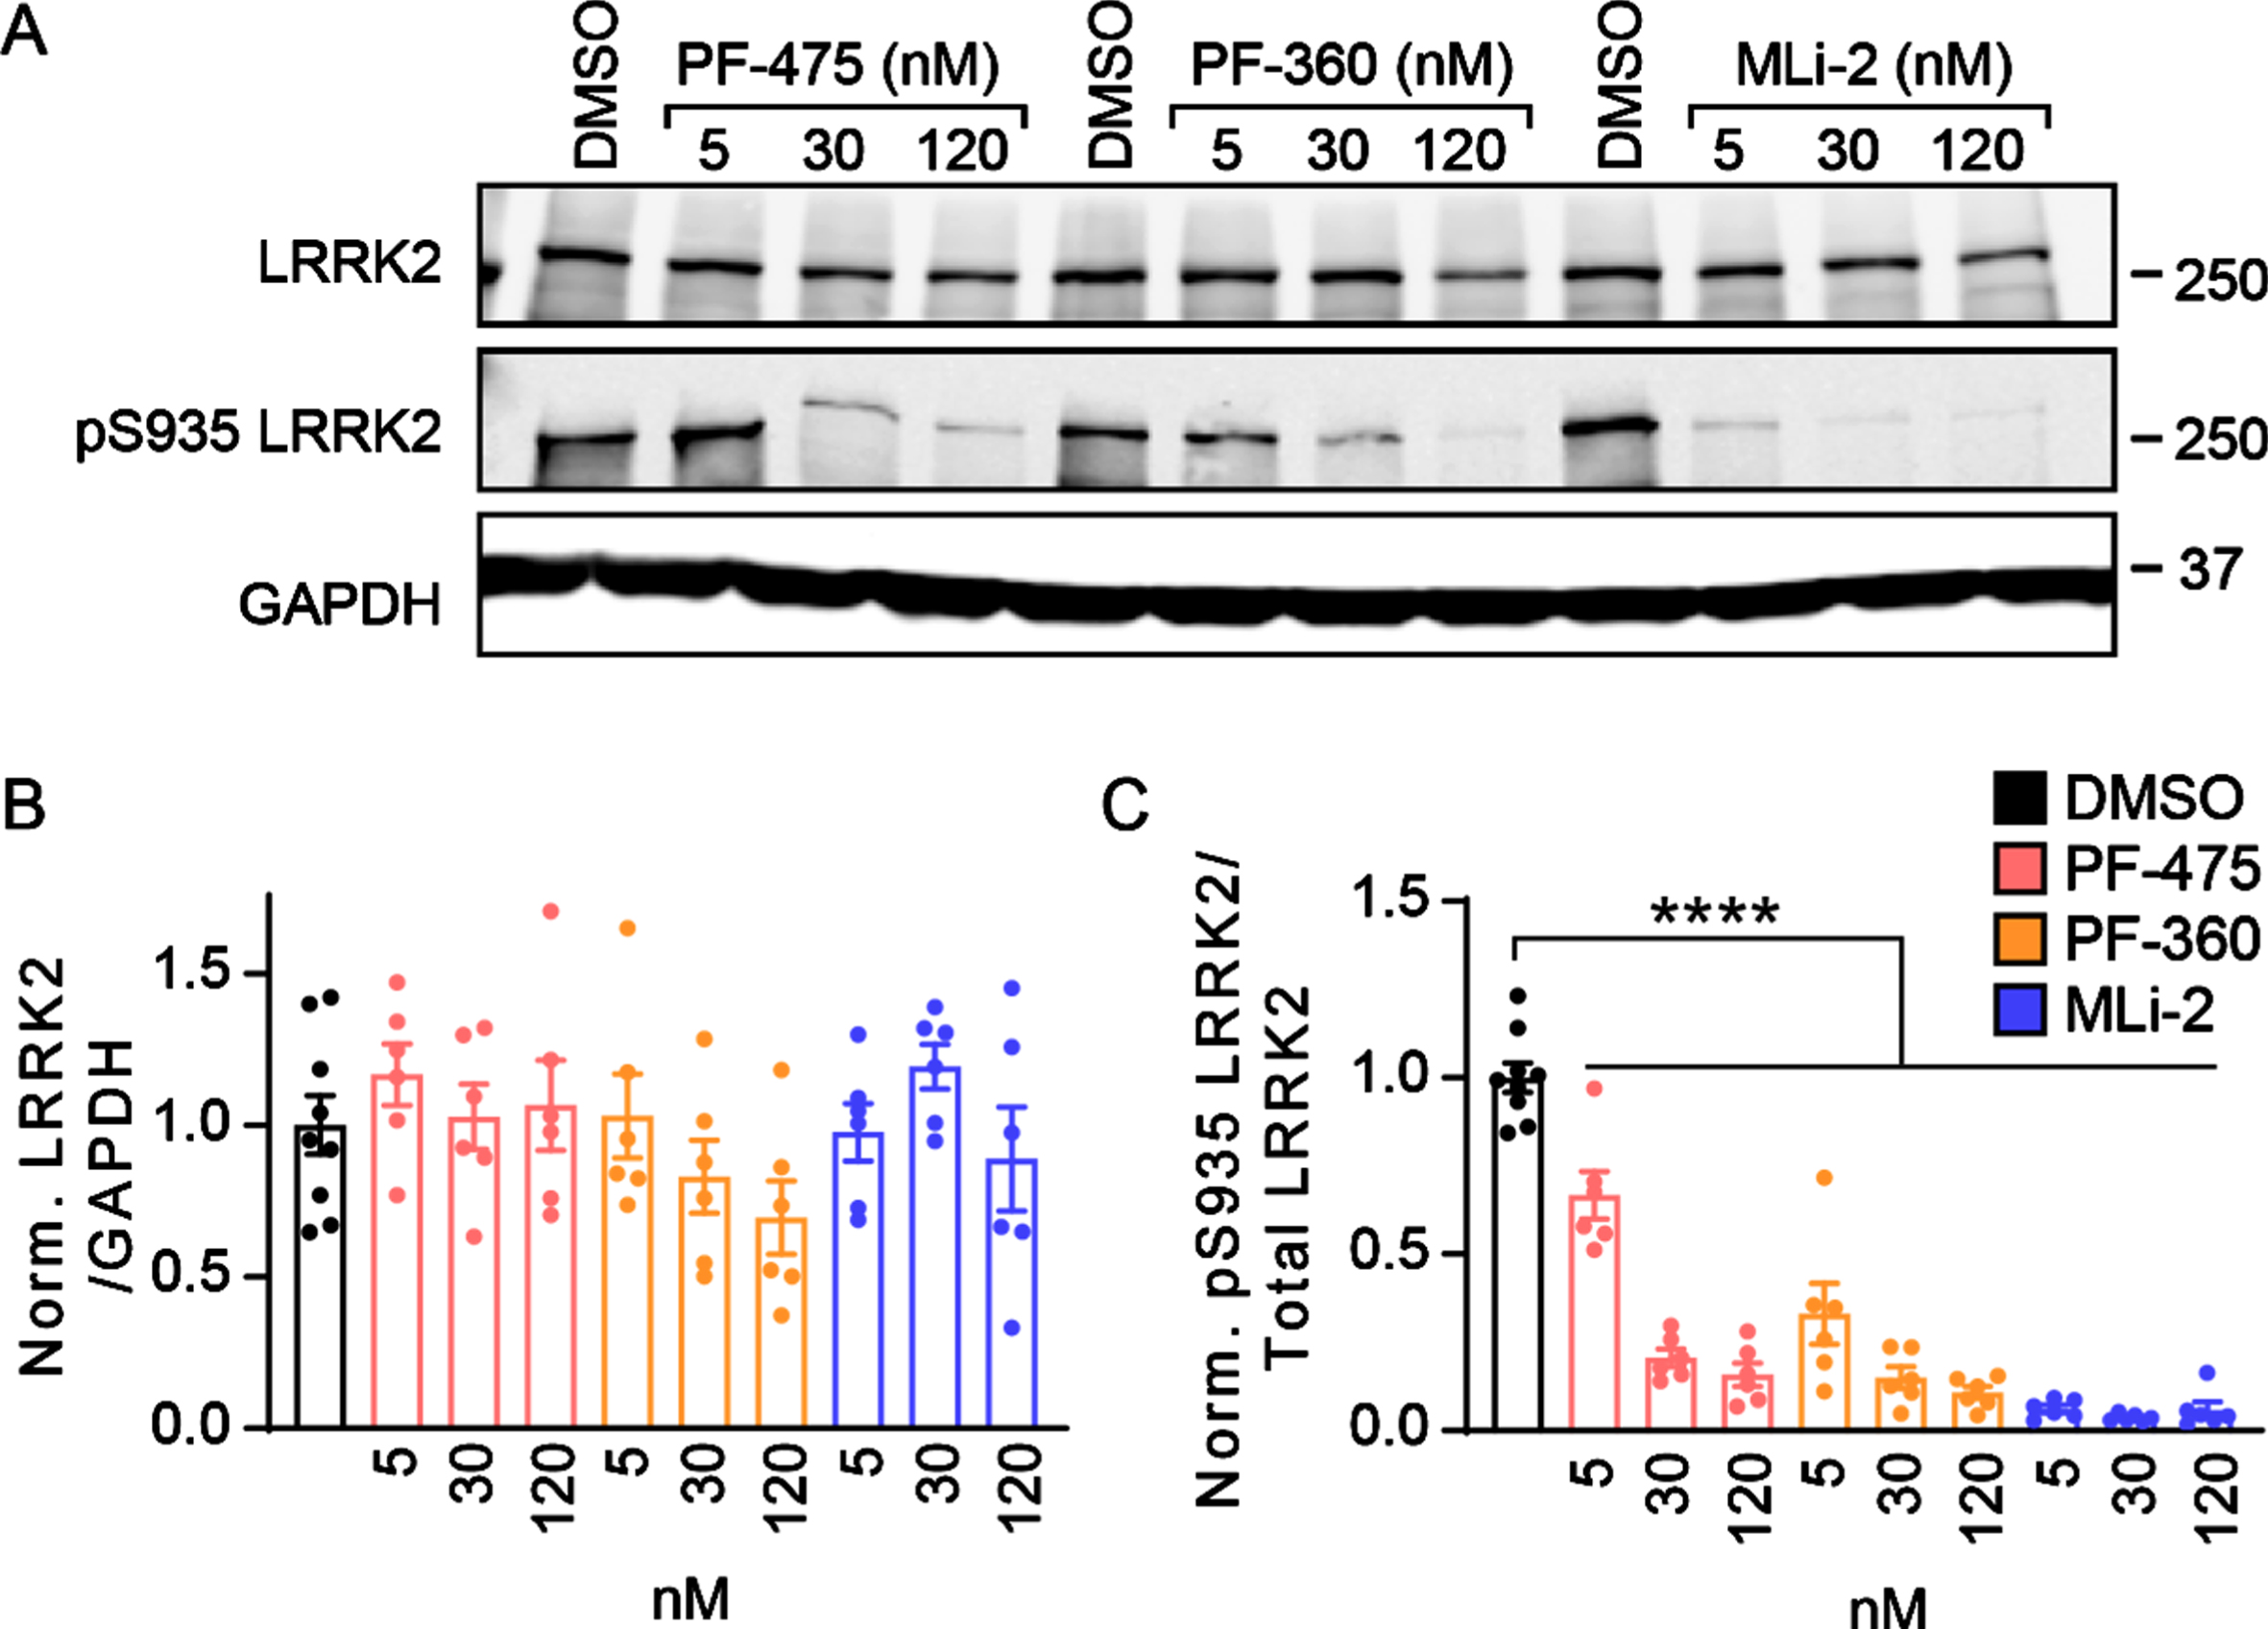 LRRK2 kinase inhibitors show prolonged inhibition of phosphorylation in primary neurons. A) Primary cortical neurons from LRRK2G2019S mice were treated at 5 days in vitro (DIV) with LRRK2 inhibitors at the noted concentrations and lysate was harvested at 21 DIV. Western blot is shown for total LRRK2 and pS935 LRRK2, the latter being a proxy for LRRK2 activity. B) Quantification of total LRRK2 normalized to GAPDH and vehicle treatment (One-way ANOVA; Dunnett’s multiple comparison test: all p > 0.05., n = 6–9 samples/group). (C) Quantification of pS935 normalized to total LRRK2 and vehicle treatment (One-way ANOVA; Dunnett’s multiple comparison test: all ****p < 0.0001 as compared to vehicle treatment, n (separate cultures) = 6–9 independent samples/group).